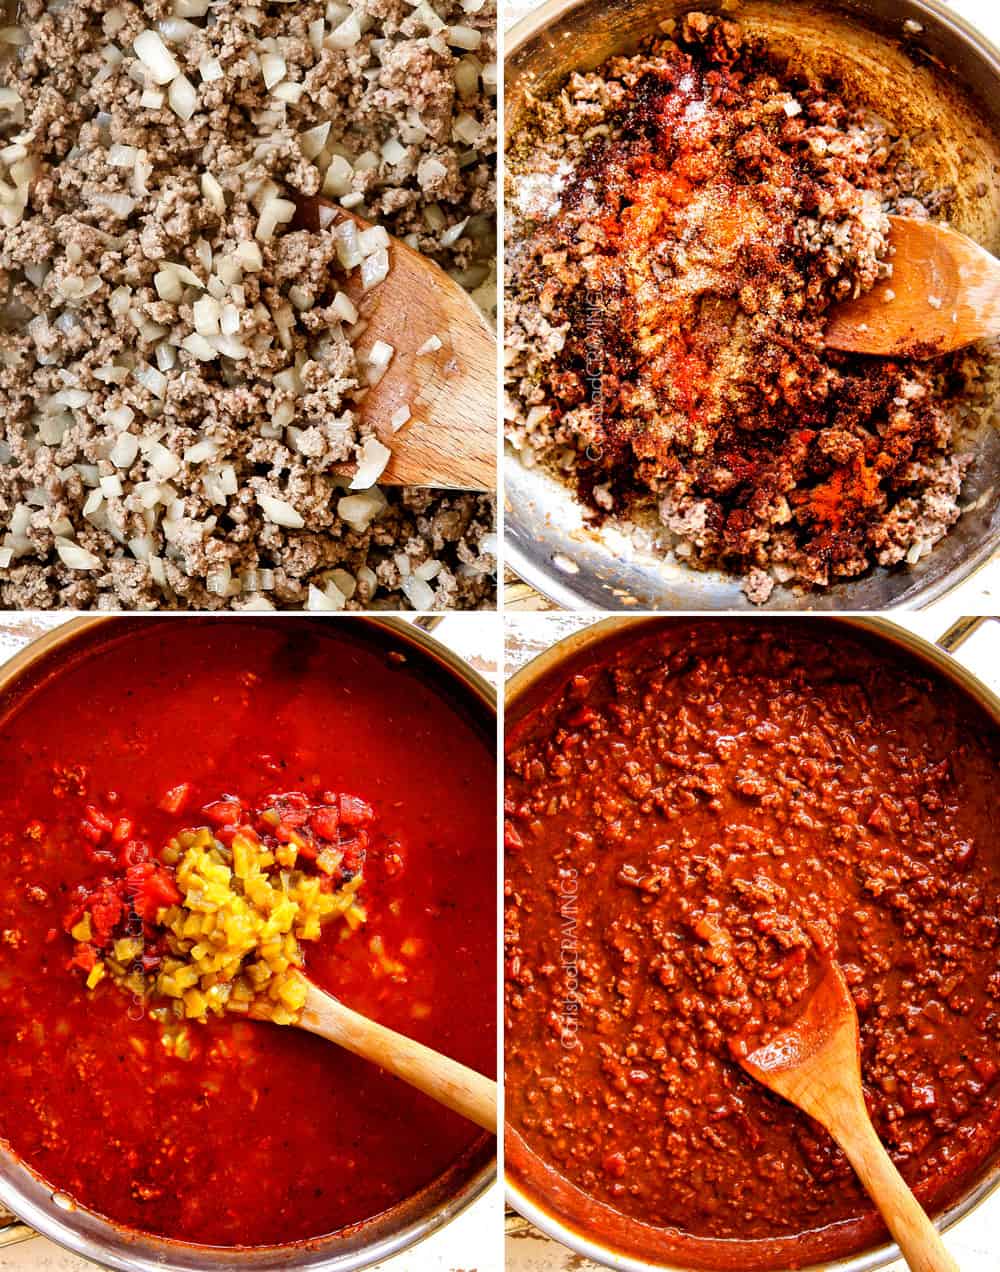 a 4 way collage showing how to make enchilada casserole recipe by 1) browning beef and onions, 2) sautéing tomato paste and spices, 3) adding tomatoes, broth and green chilies, 4) simmering until thickened